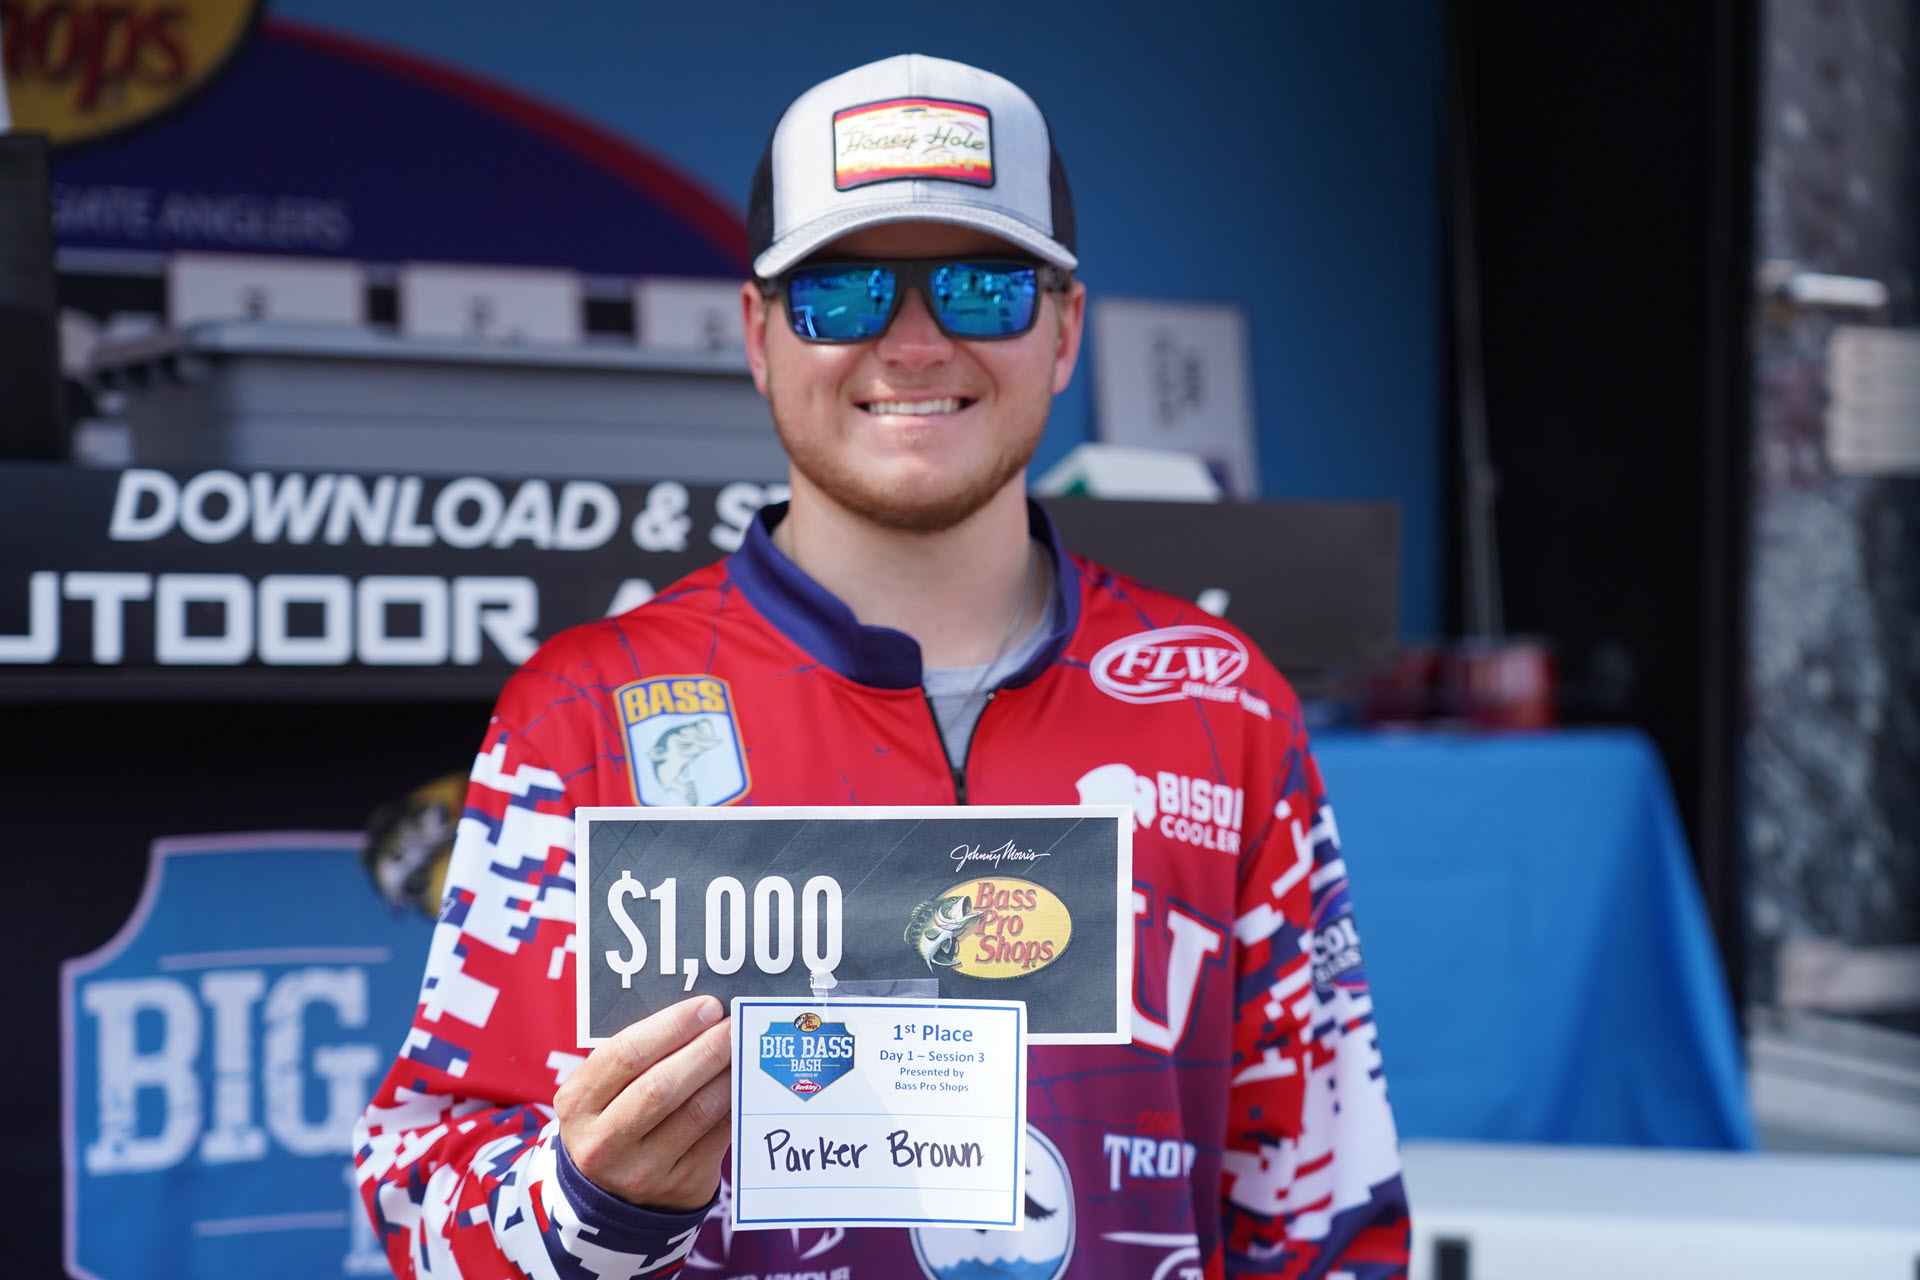 Dallas Baptist's Parker Brown Takes Day 1 Lead at Bass Pro Shops